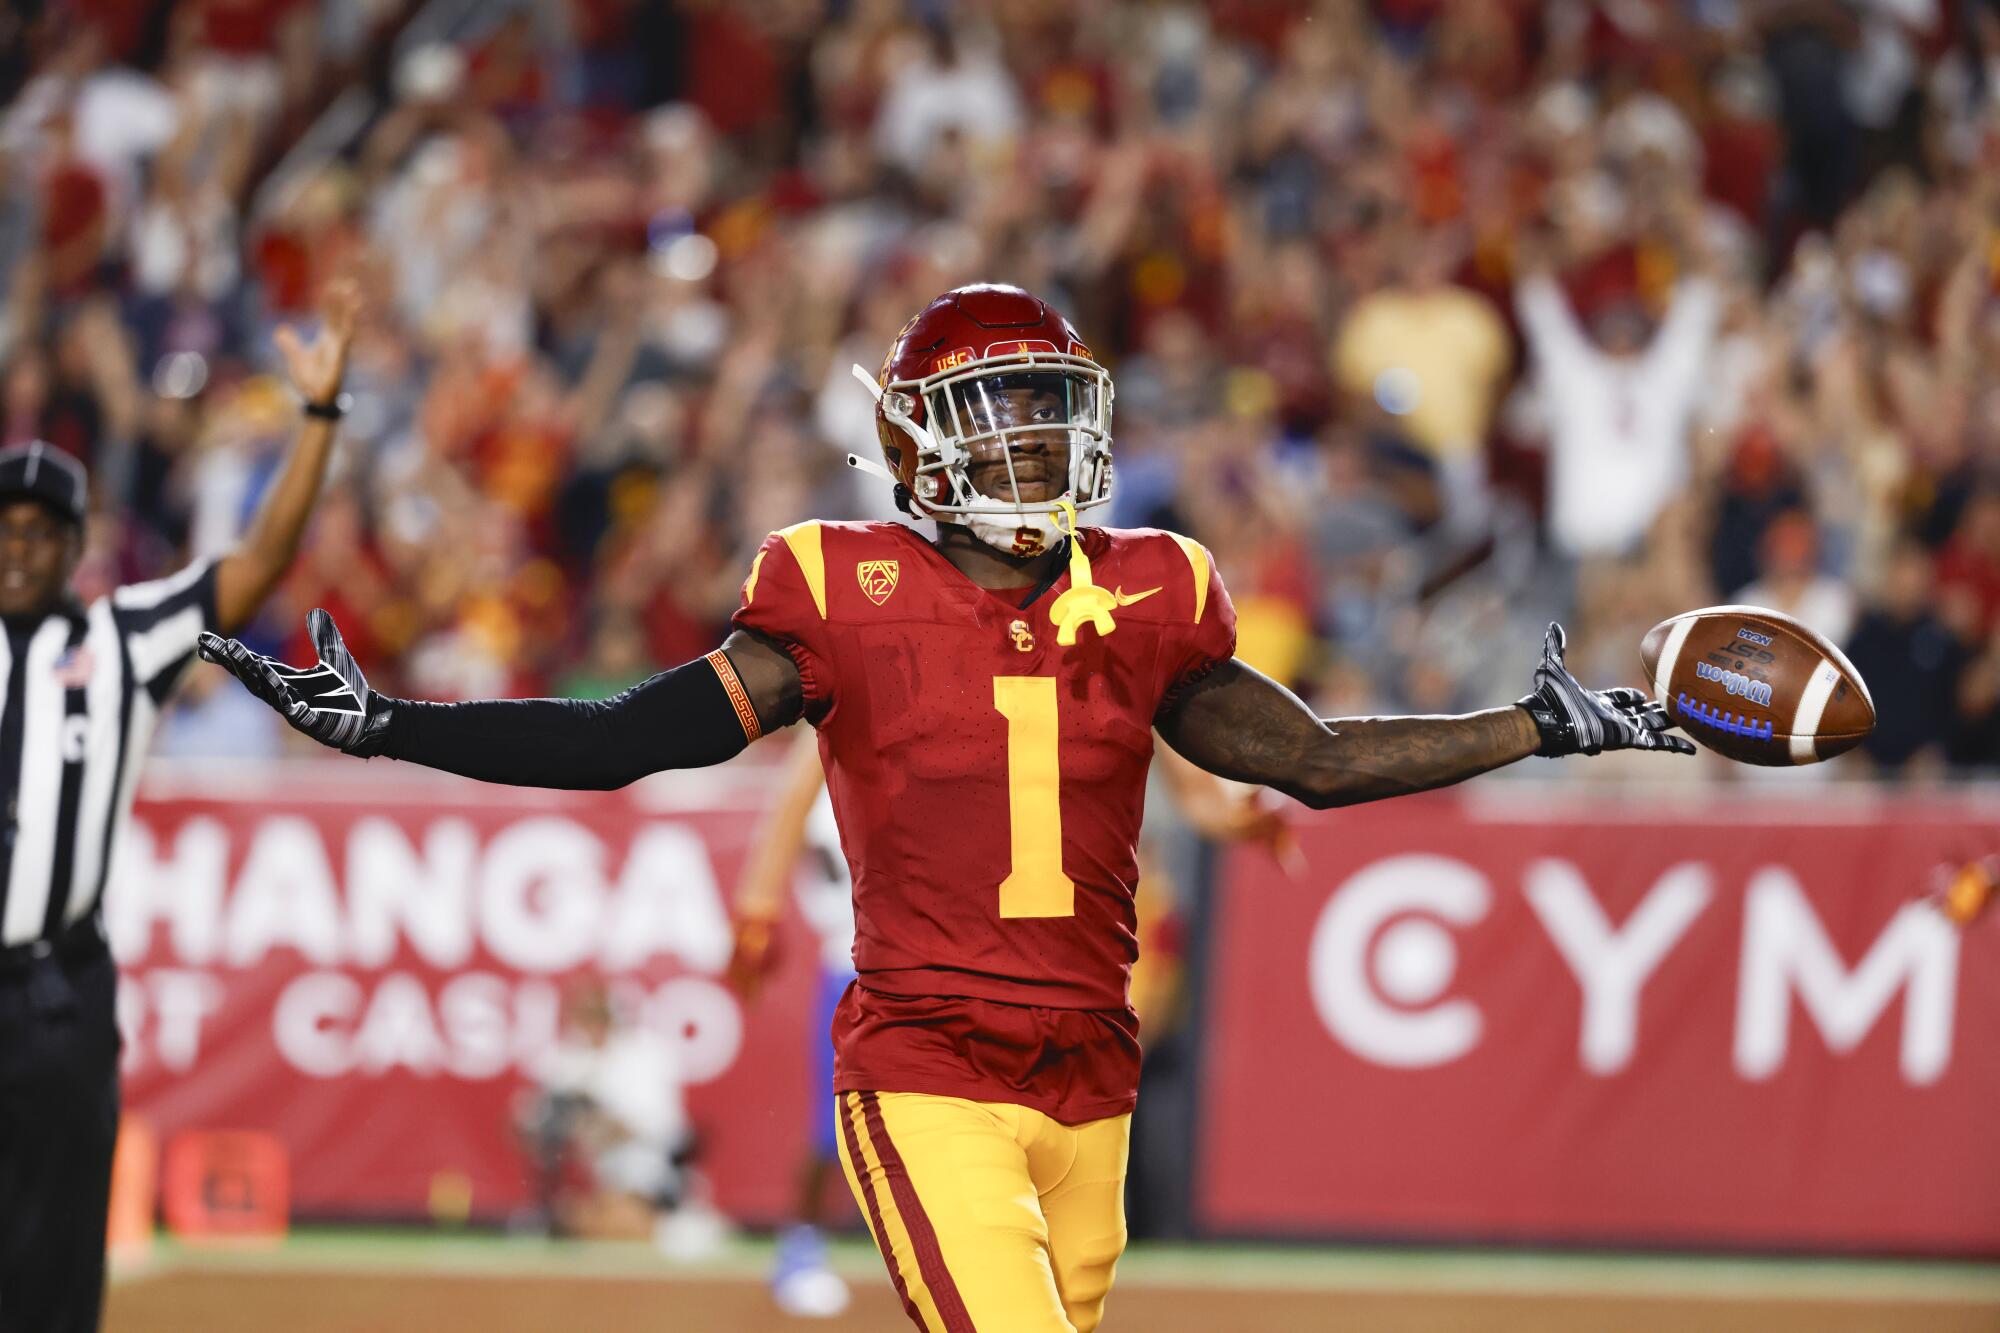 USC receiver Zachariah Branch extends his arms and celebrates after returning a kickoff for a touchdown 